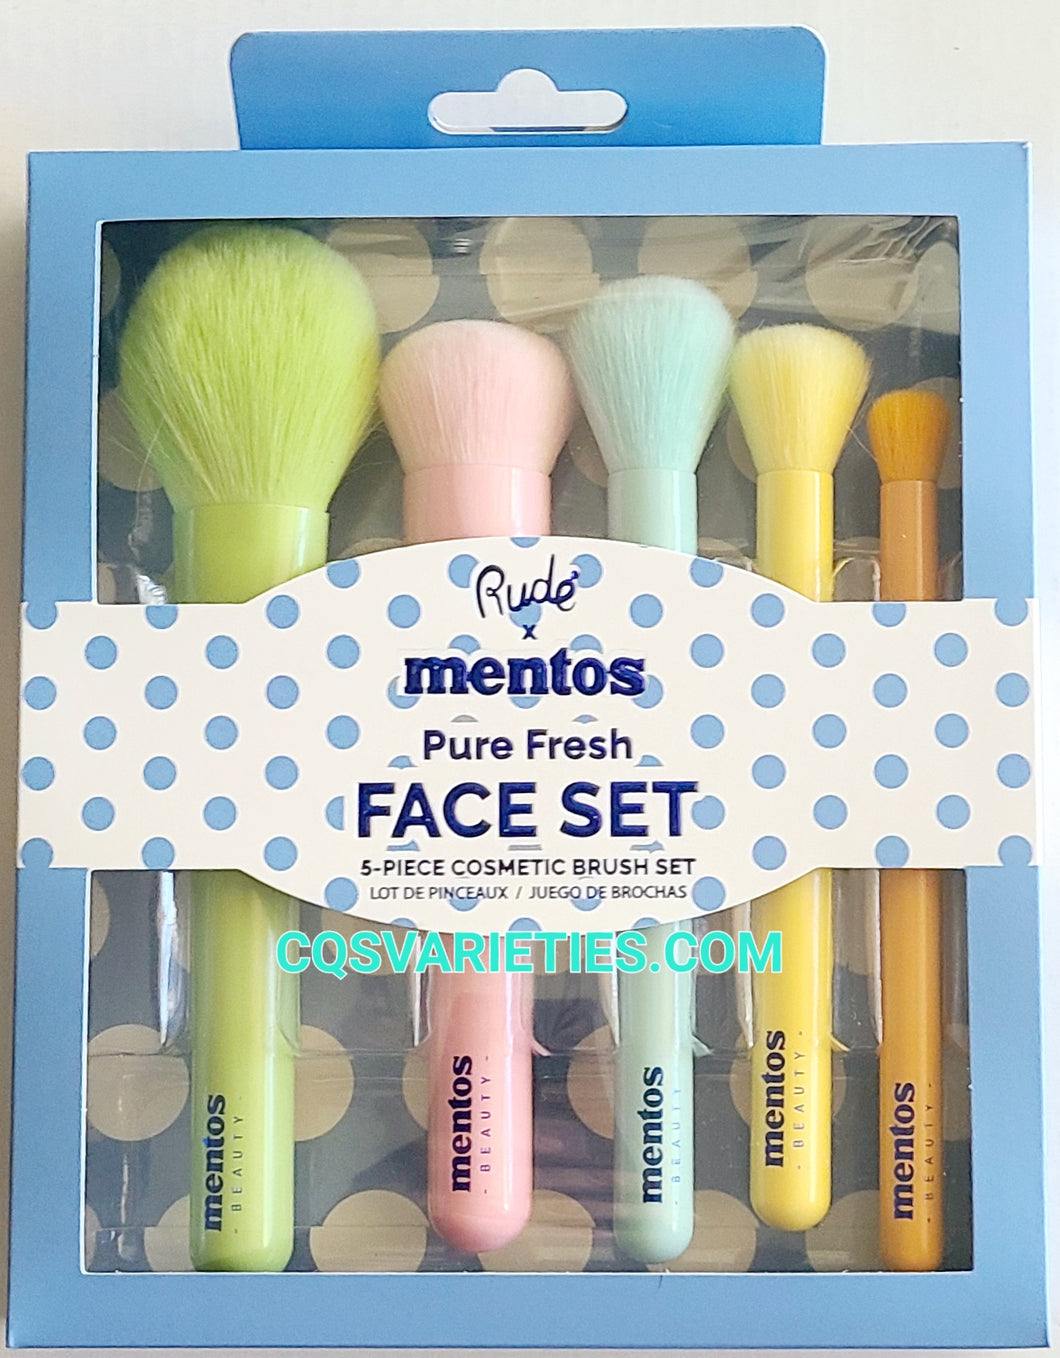 Mentos Pure Fresh Face Or Eye Brushes Set By Rude X Cosmetics